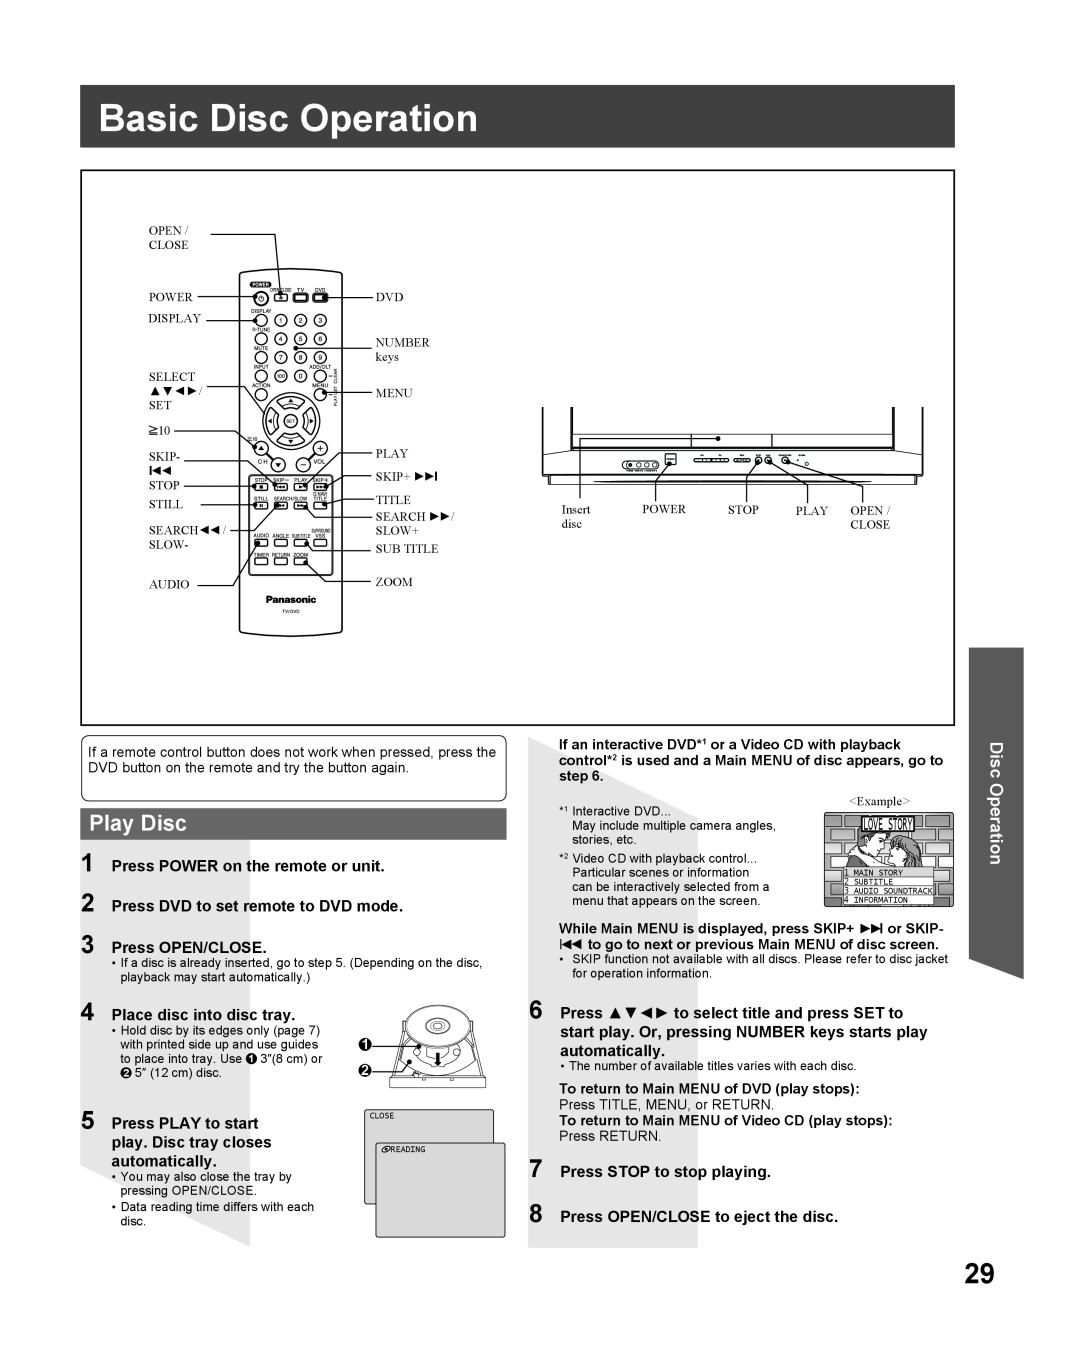 Panasonic PV-27DF5 manual Basic Disc Operation, Play Disc, Press POWER on the remote or unit, Place disc into disc tray 